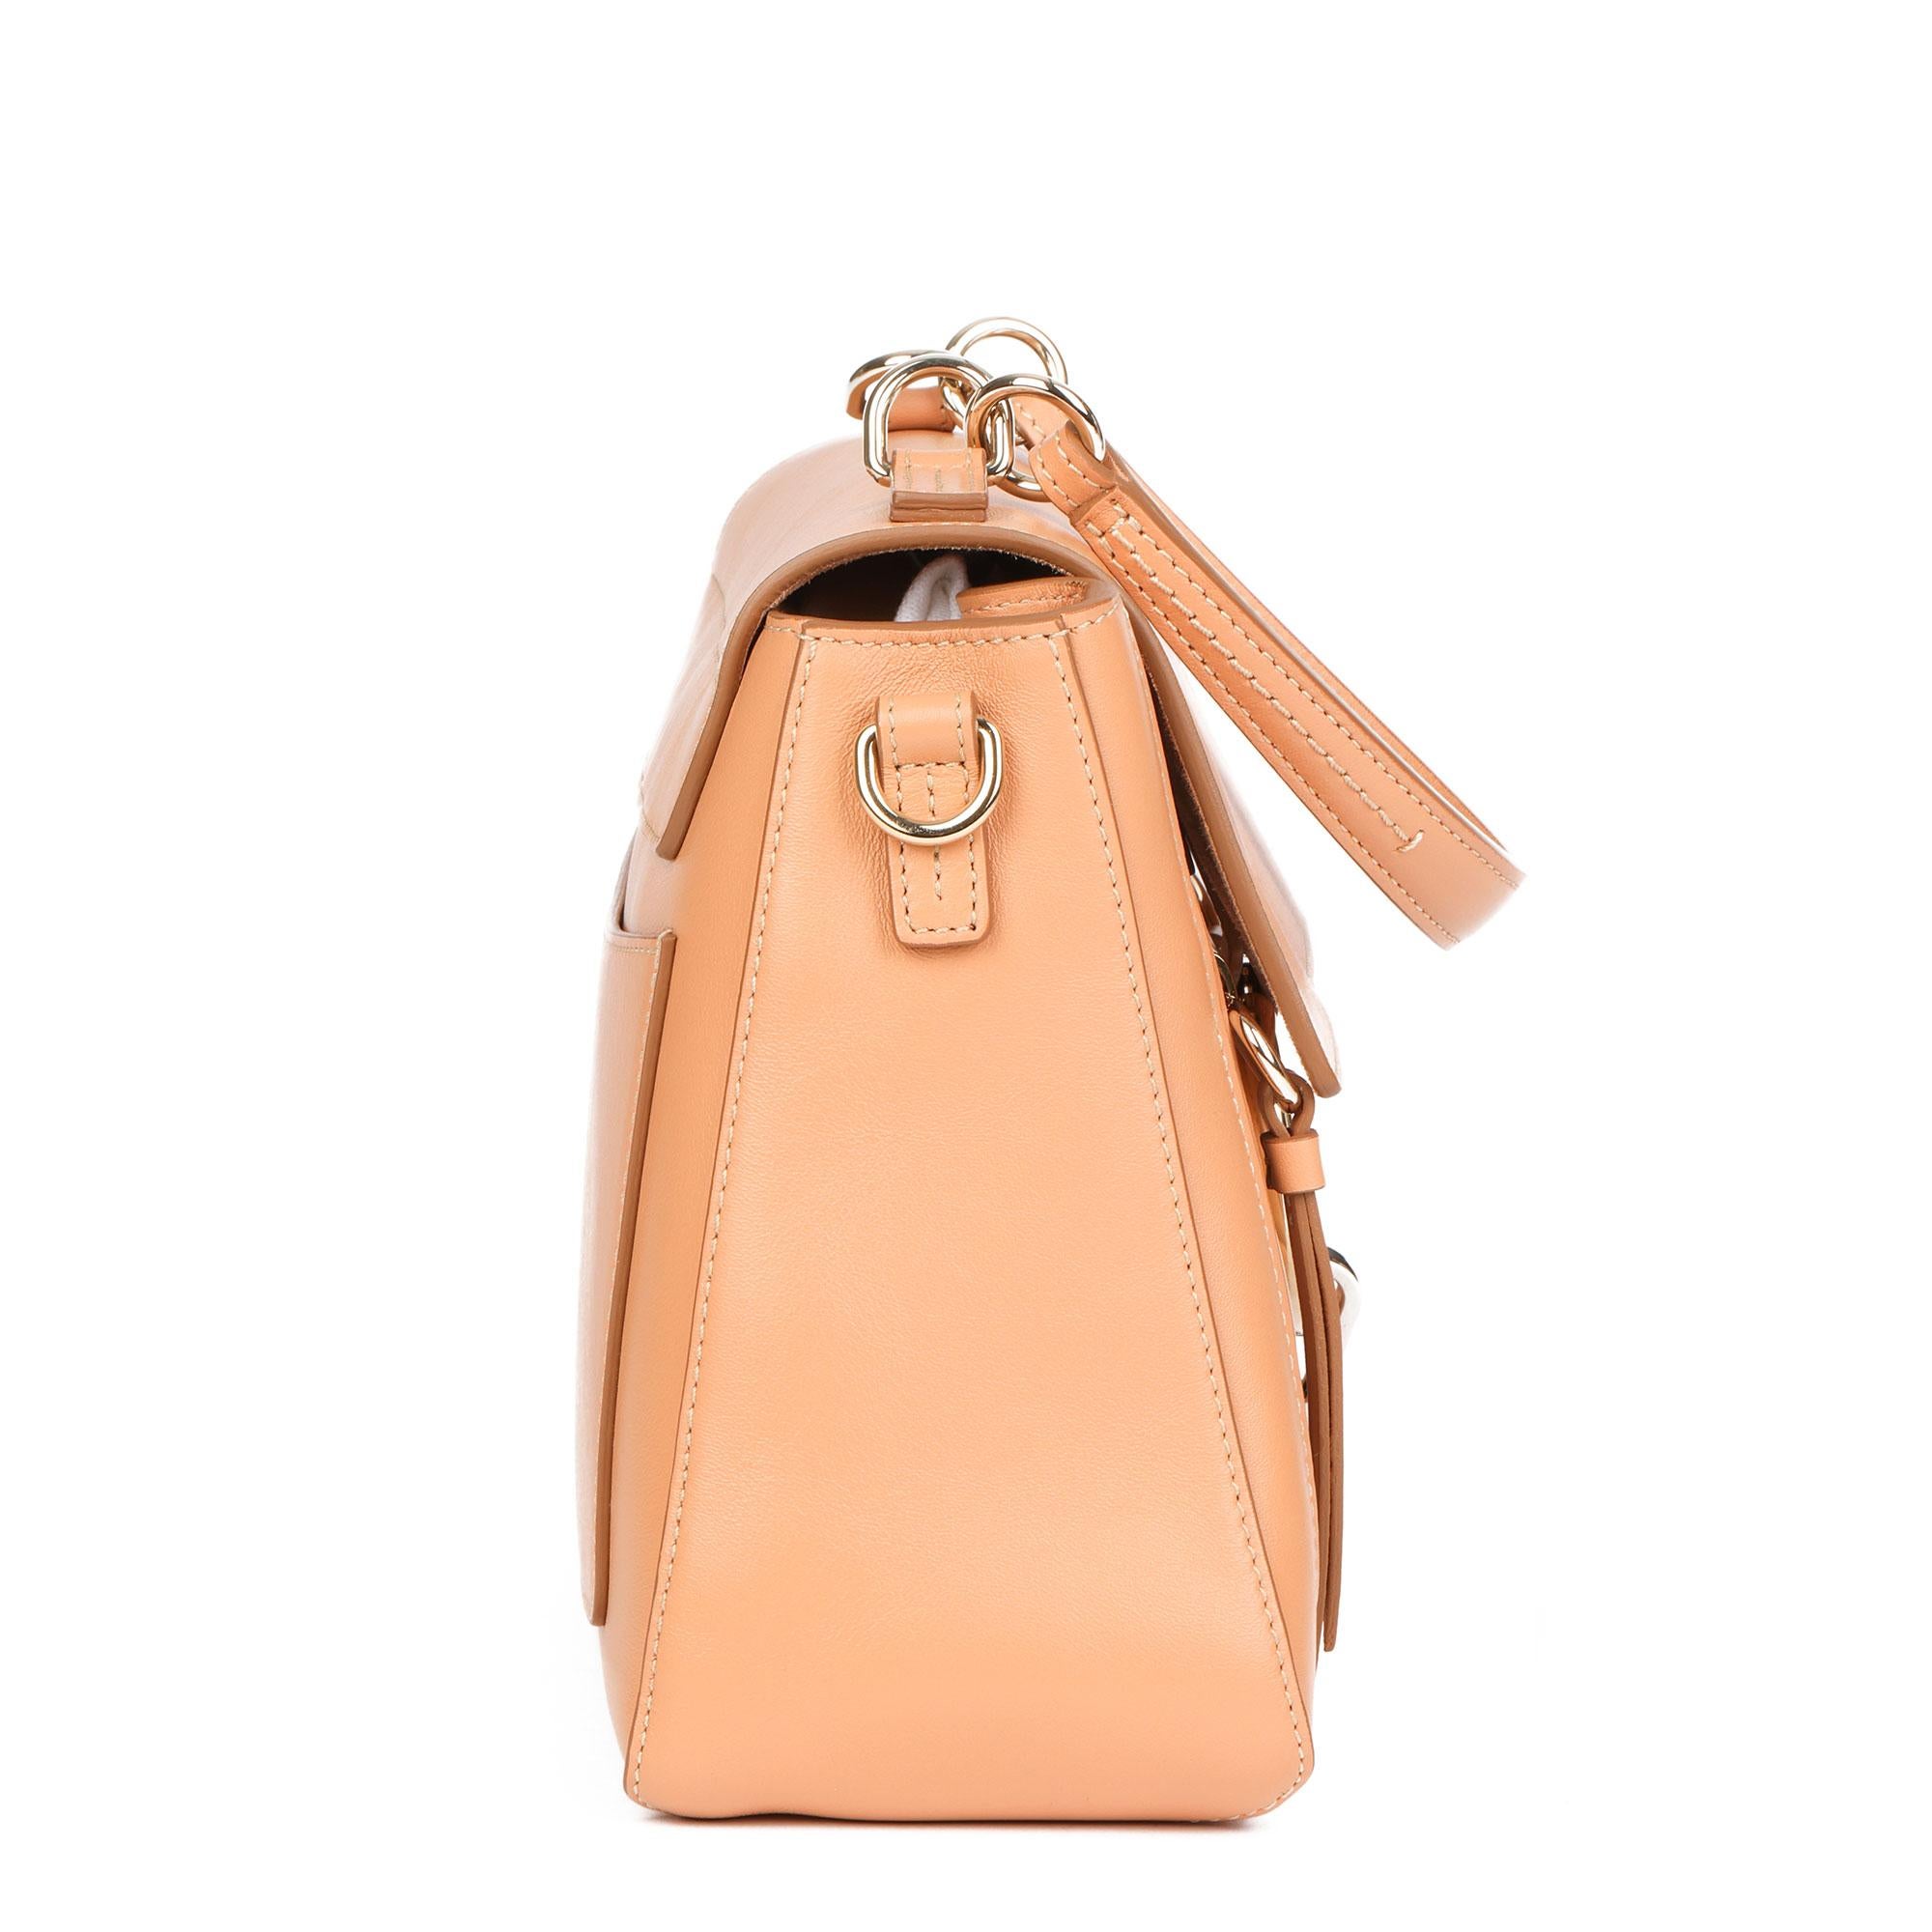 CHLOÉ
Peach Quilted Calfskin Leather & Suede Small Faye Day Bag

Xupes Reference: CB398
Serial Number: C0S05F
Age (Circa): 2021
Accompanied By: Chloé Dust Bag, Shoulder Strap, Care Booklets
Authenticity Details: Date Stamp (Made in Italy)
Gender: